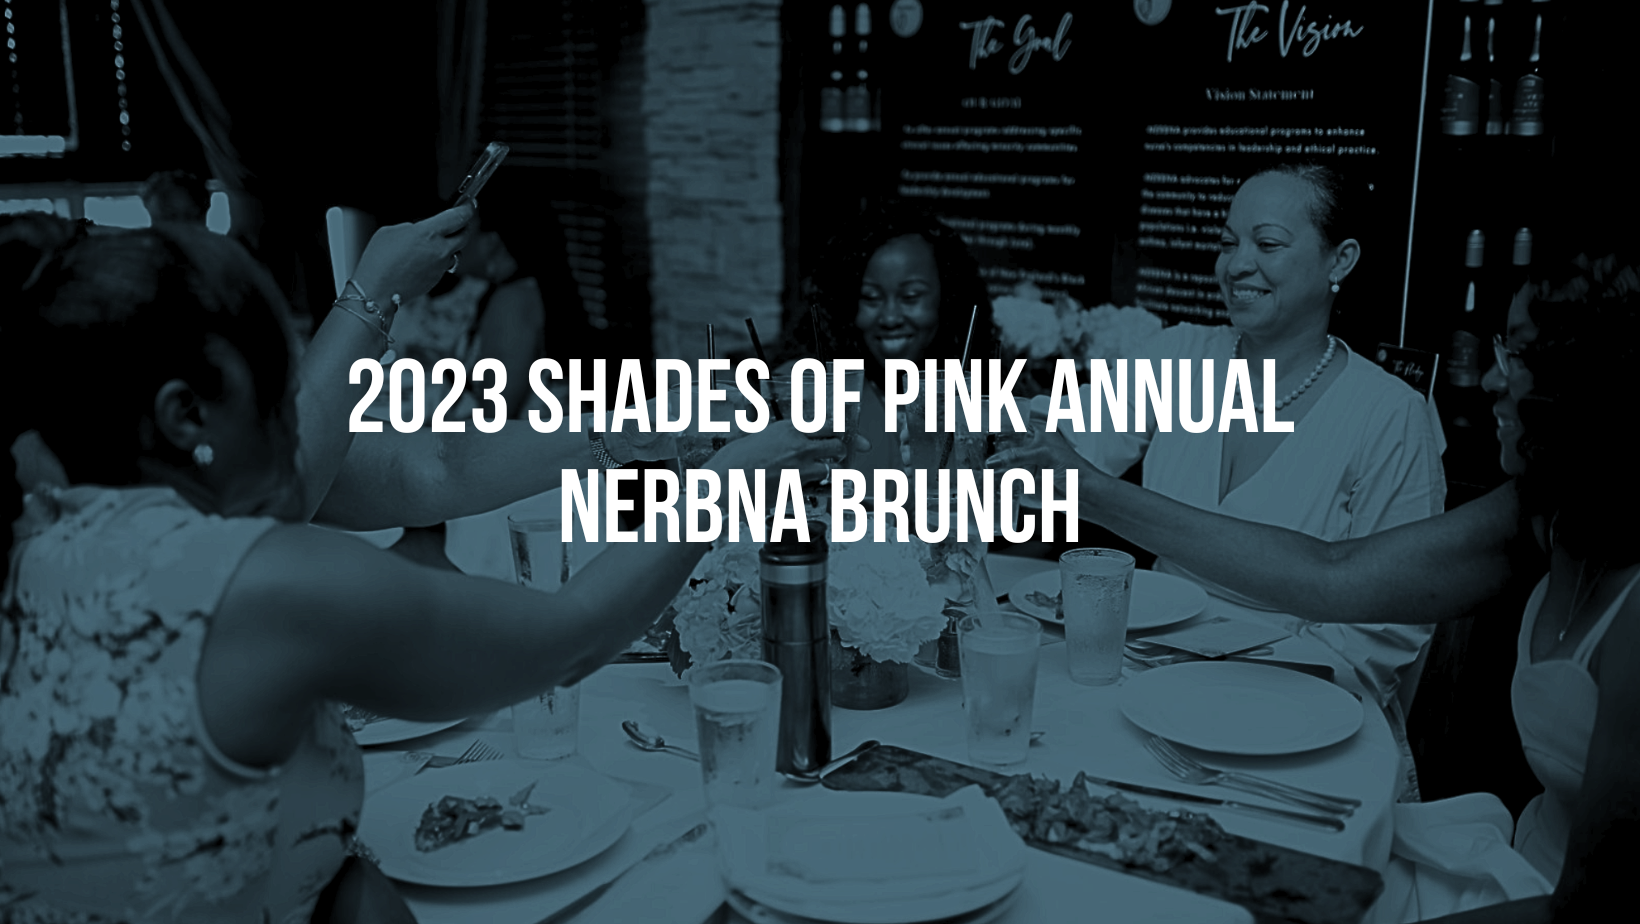 2023 SHADES OF PINK ANNUAL NERBNA BRUNCH